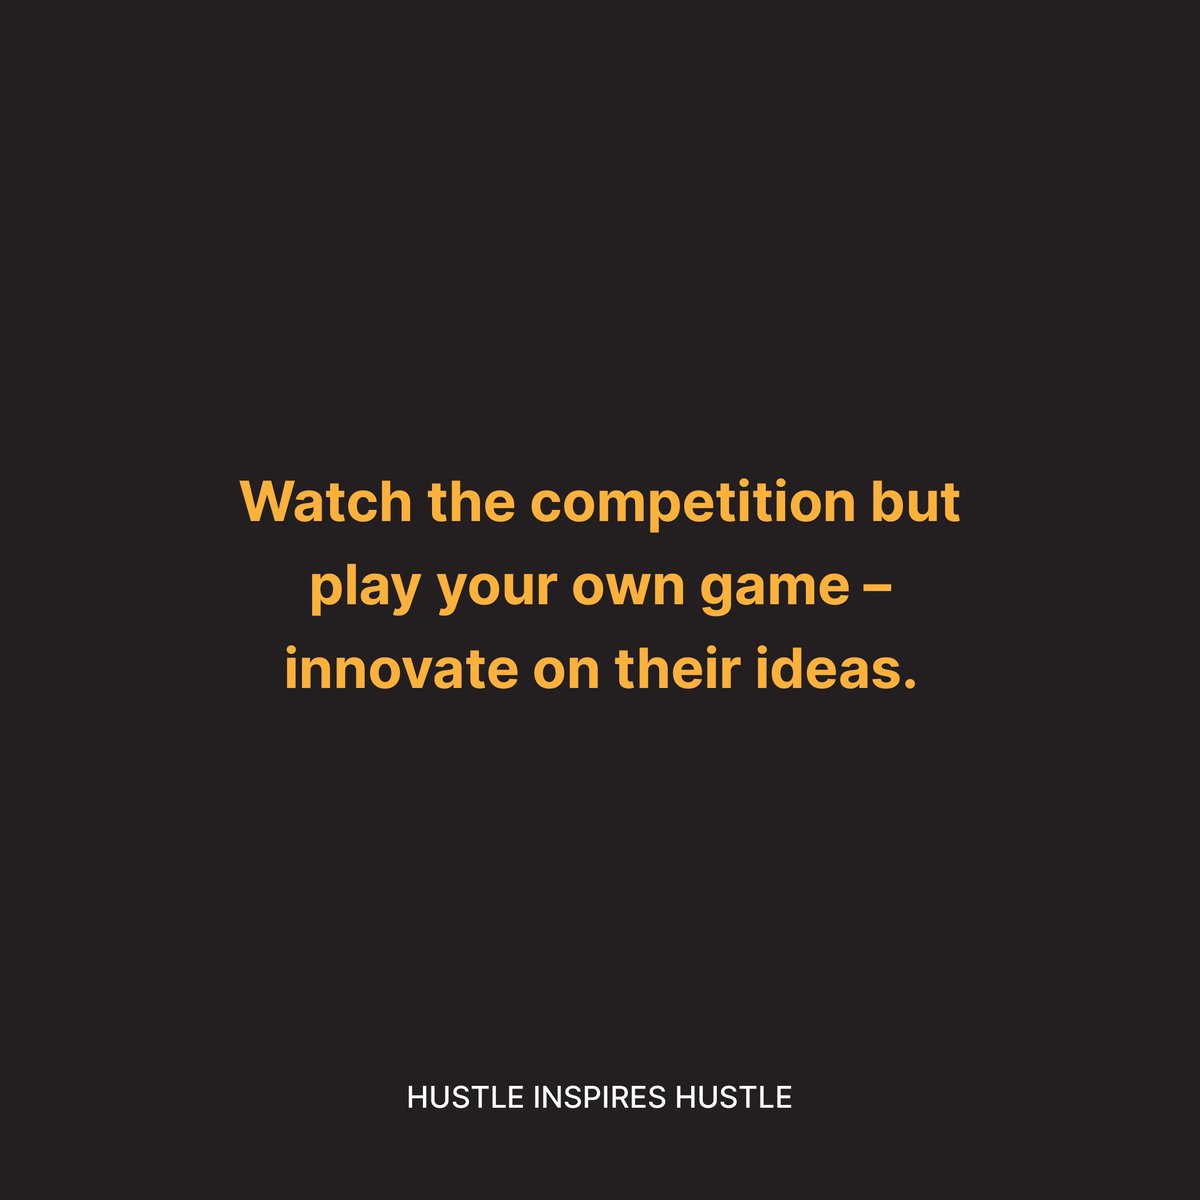 🔄 Swipe for a series of morning boosts that every entrepreneur needs.

Your playbook for making today count.

Save this post and tag a fellow hustler who could use this power-up!

#HustleInspiresHustle #AlexQuin #entrepreneurship #quotesgram #dailyquotes #quotestoinspire